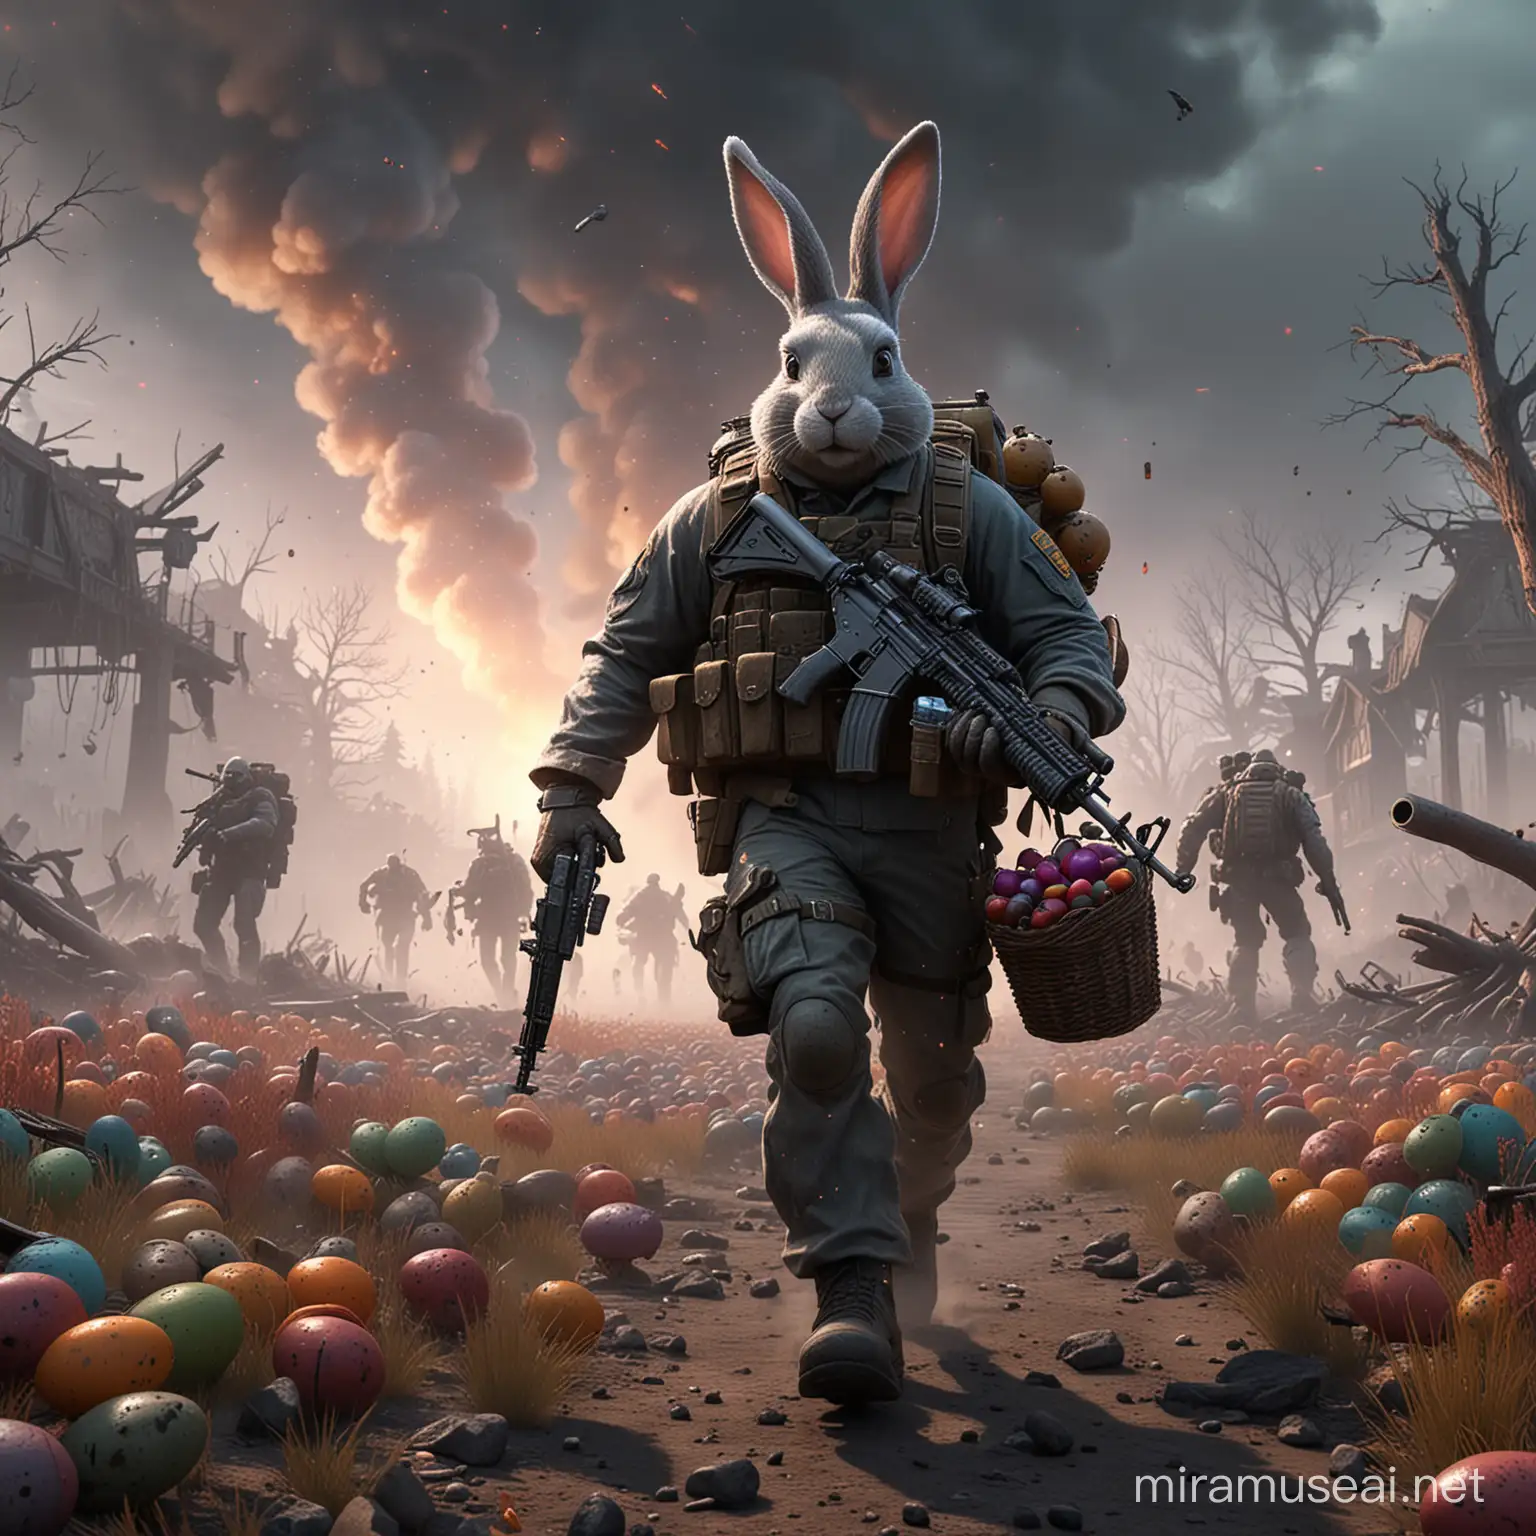 Apocalyptic Easter Bunny Basket of Hand Grenades and Machine Gun in Brandt Peters Style